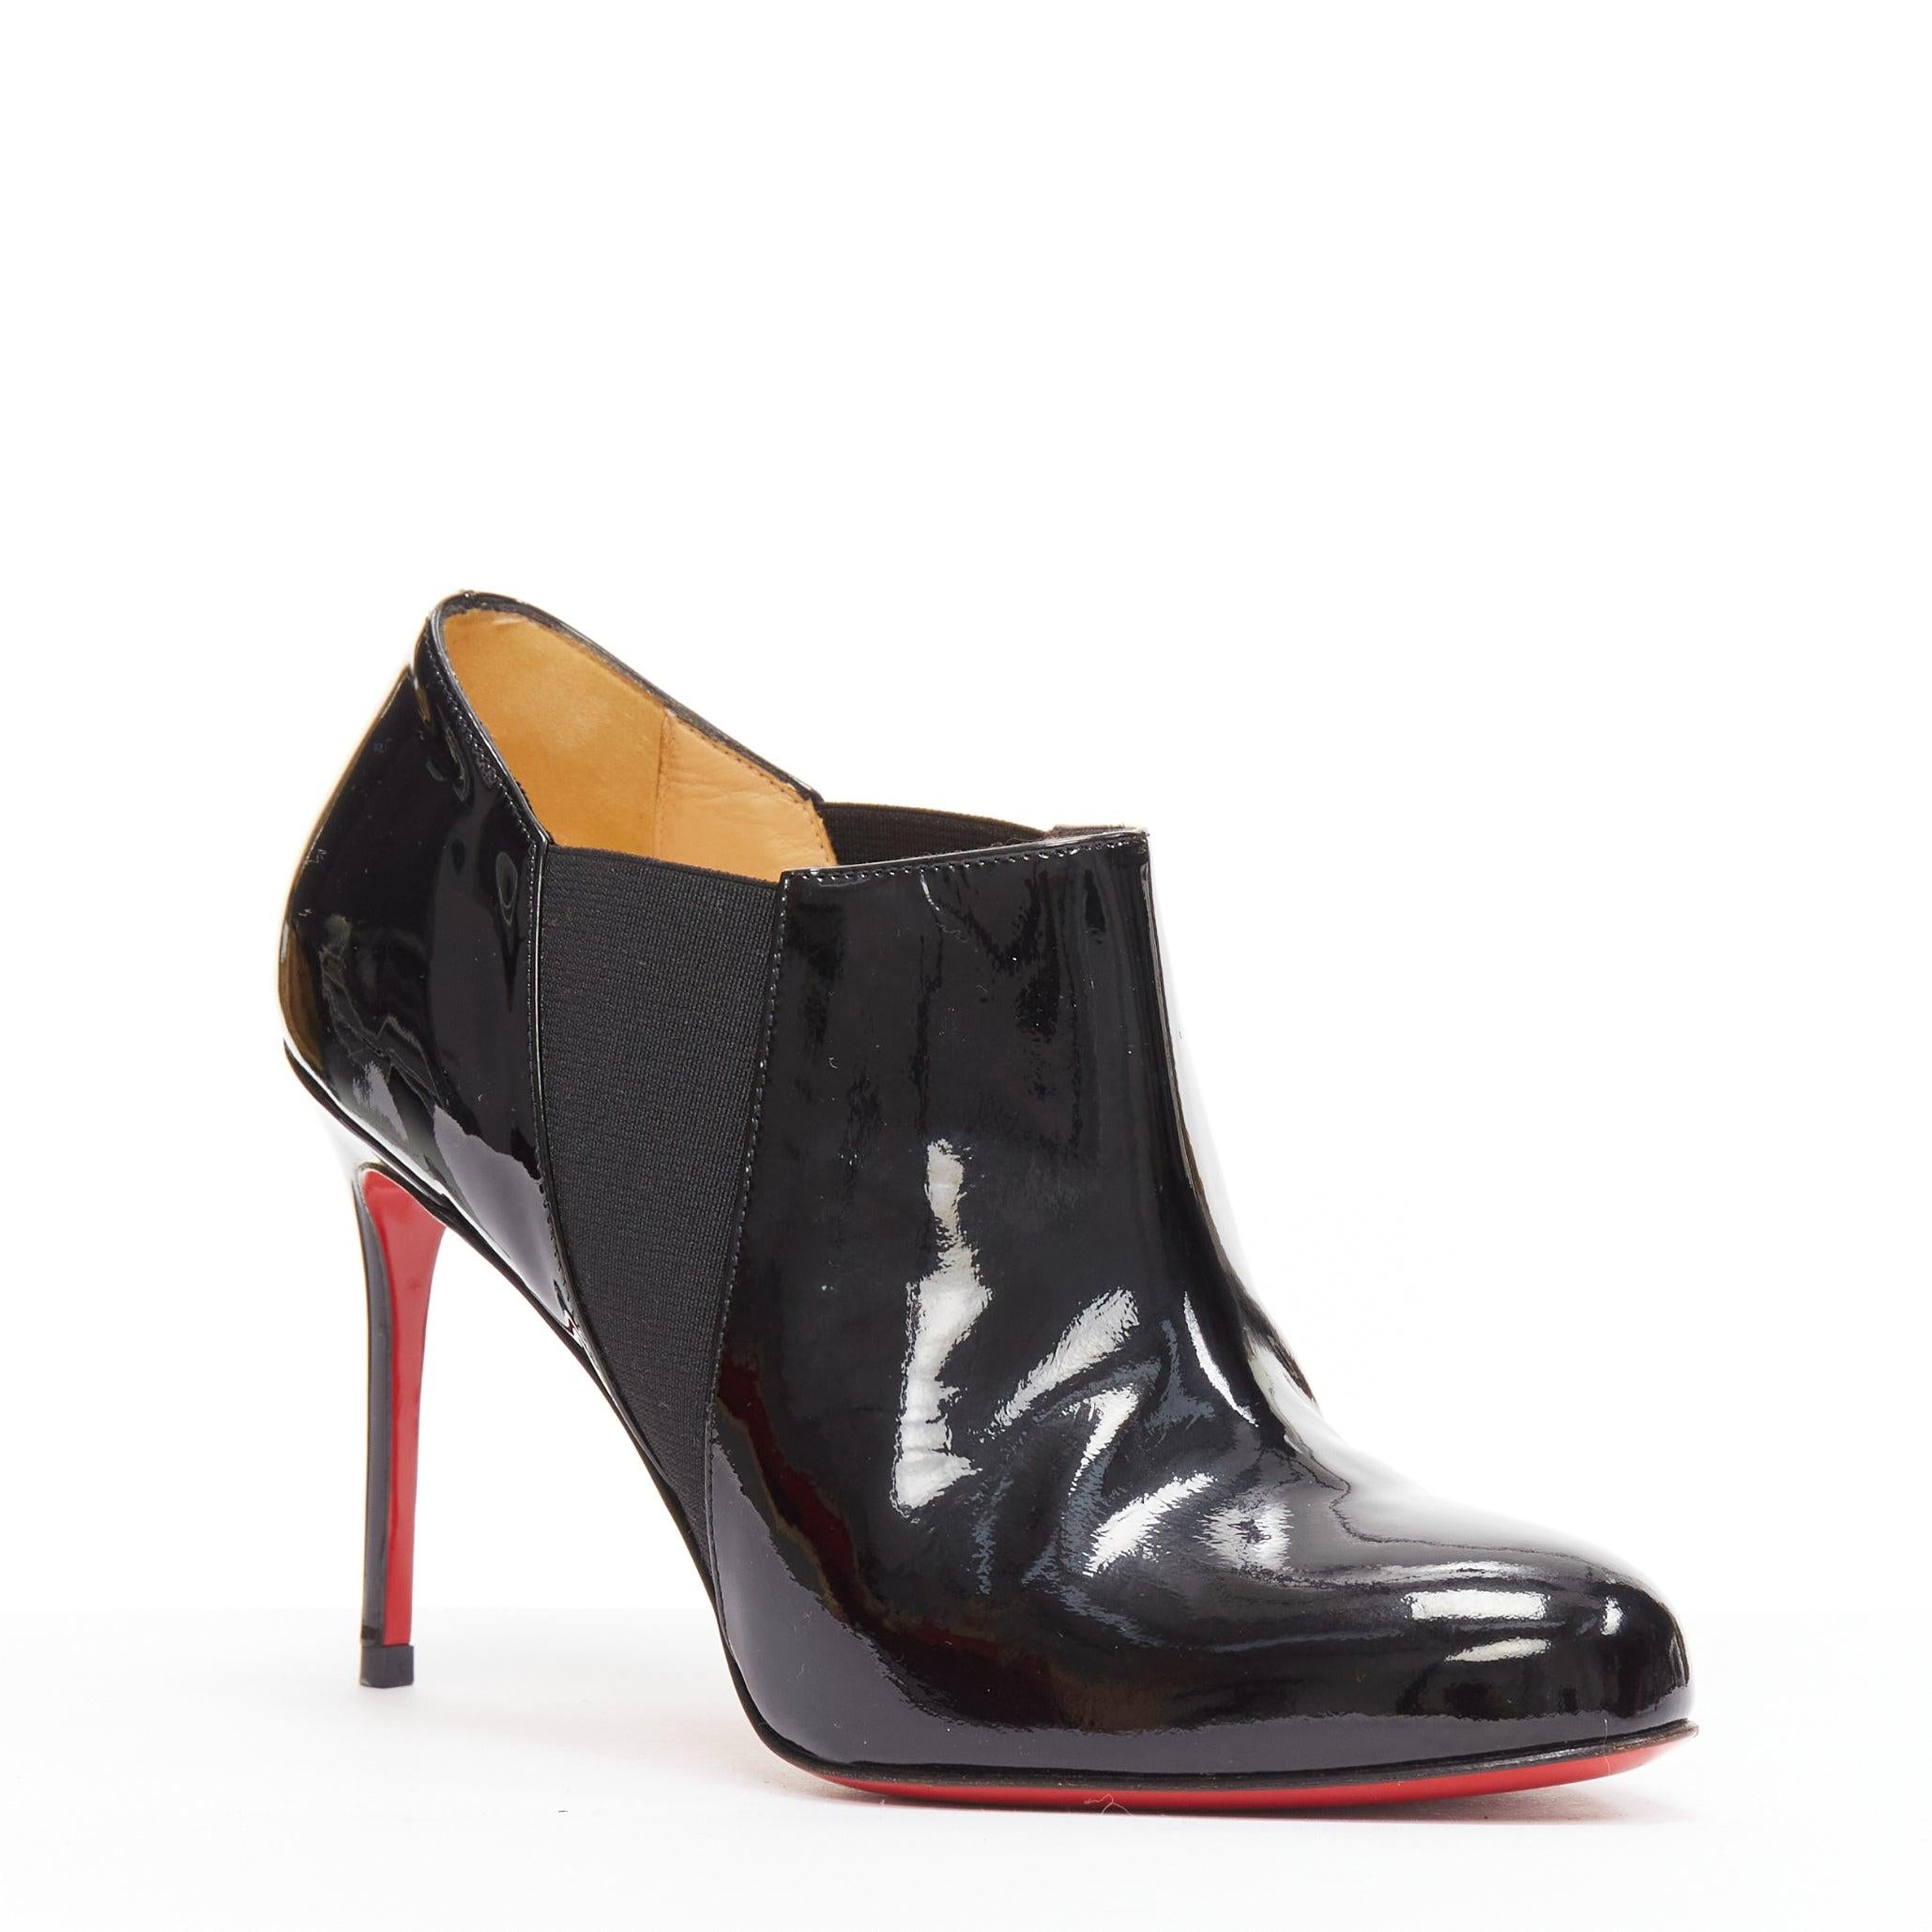 CHRISTIAN LOUBOUTIN Lastoto 80 black patent leather bootie heels EU37
Reference: MAFK/A00004
Brand: Christian Louboutin
Model: Lastoto 80
Material: Leather
Color: Black
Pattern: Solid
Closure: Elasticated
Lining: Nude Leather
Extra Details: